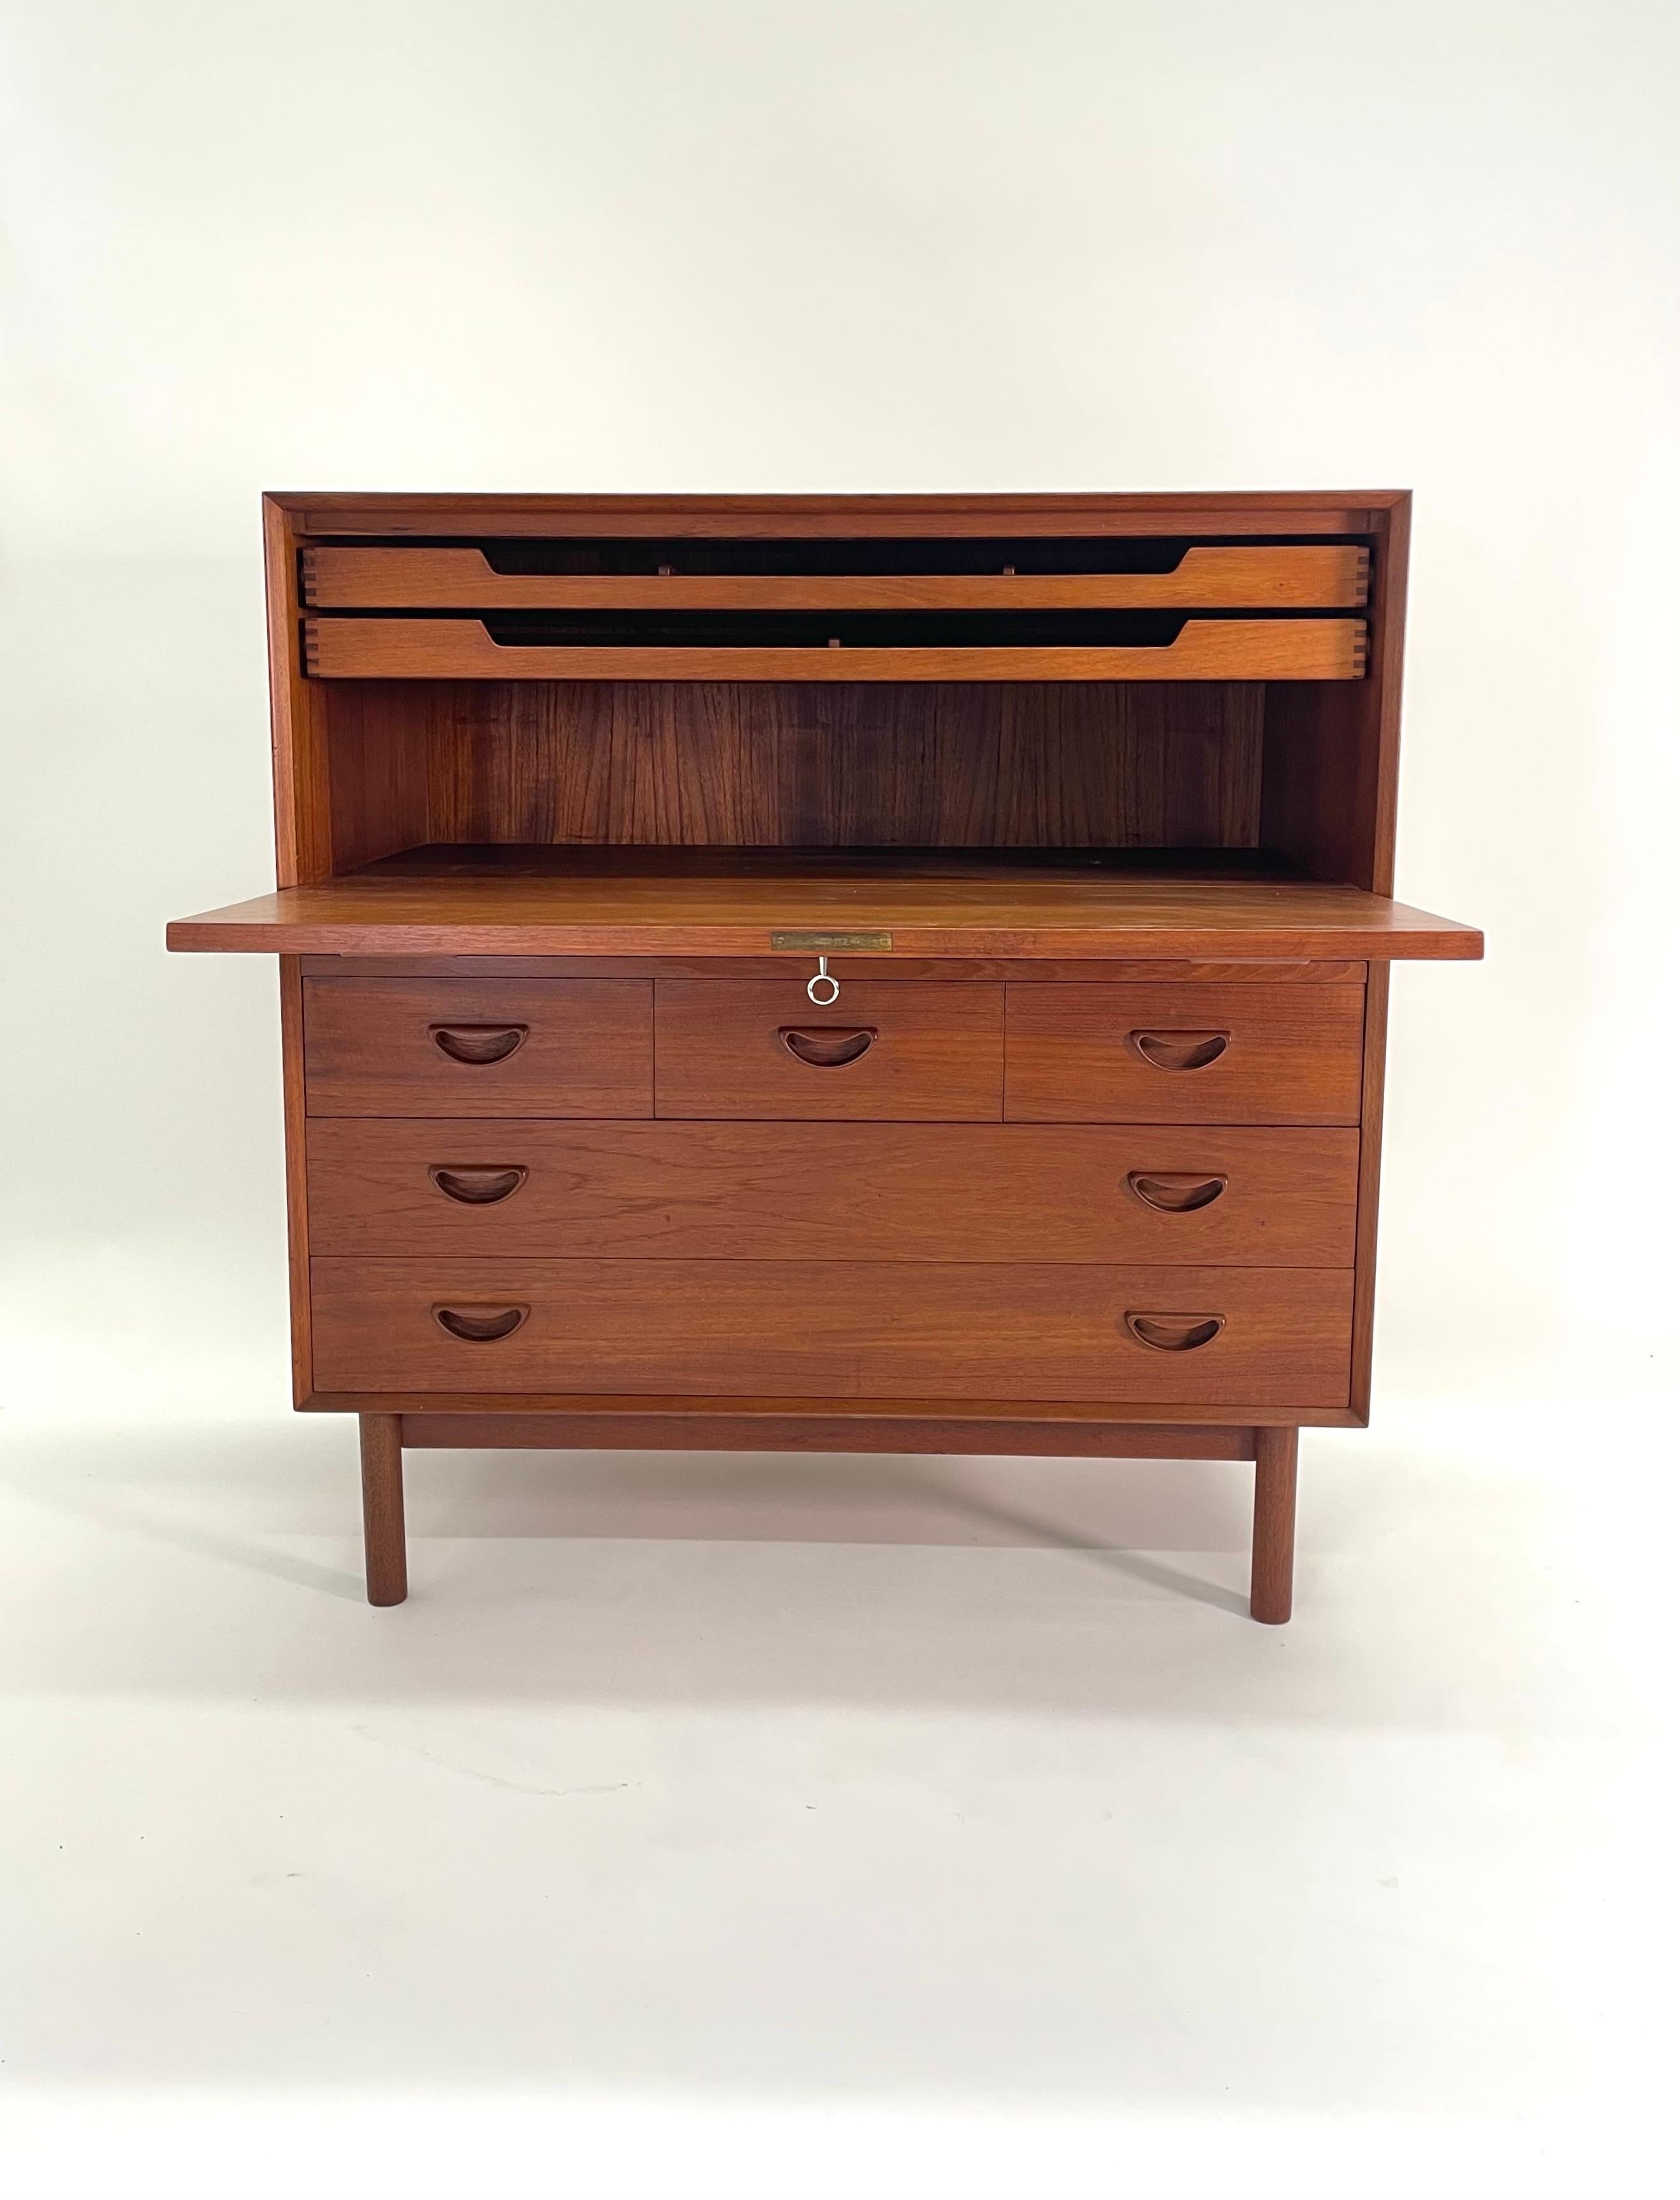 Peter Hvidt and Orla Molgaard-Nielsen drop front solid teak desk opens to drawers with beautiful dovetail joinery. The piece has three small drawers below and two larger drawers. Perfect desk for small space like a New York apartment. It can serve